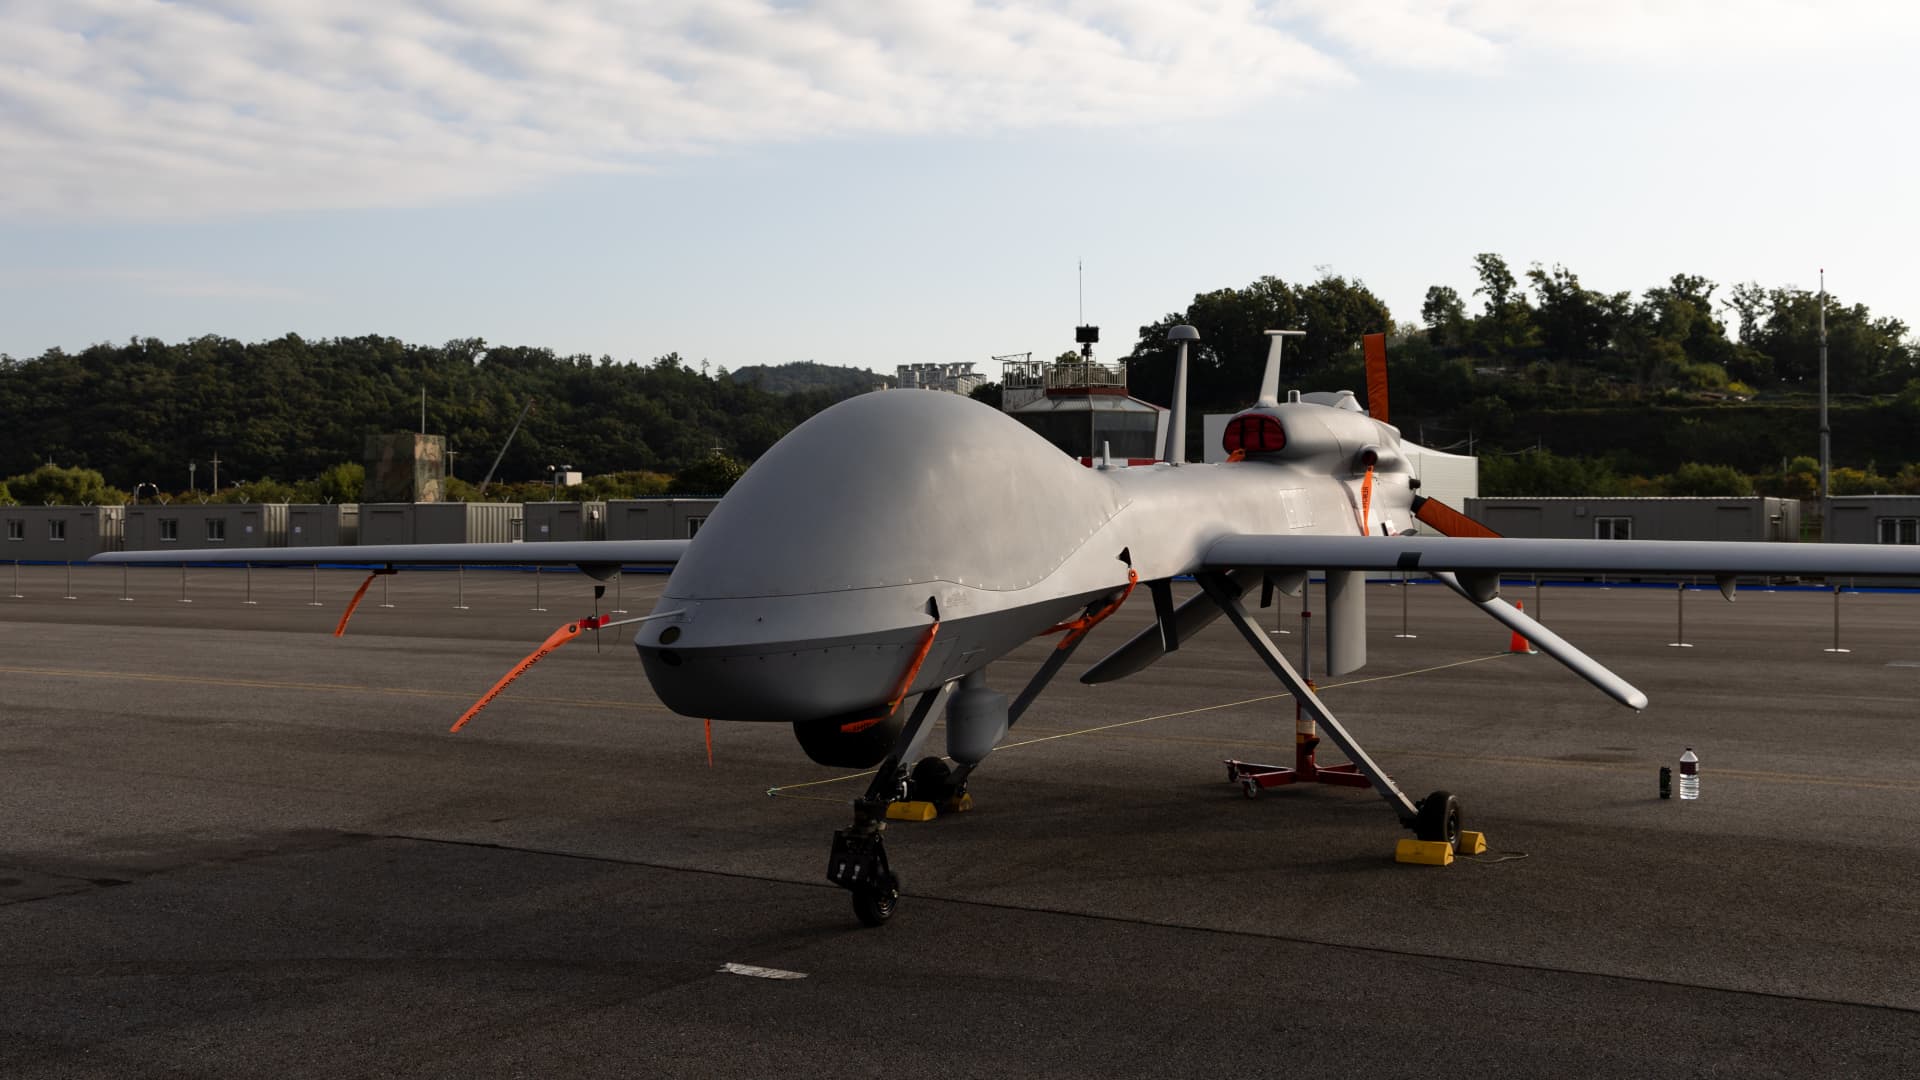 A U.S. Air Force MQ-1C Gray Eagle drone, developed by General Atomics stands on display at the Seoul International Aerospace & Defense Exhibition (ADEX) at Seoul Airport in Seongnam, South Korea, on Monday, Oct. 18, 2021.